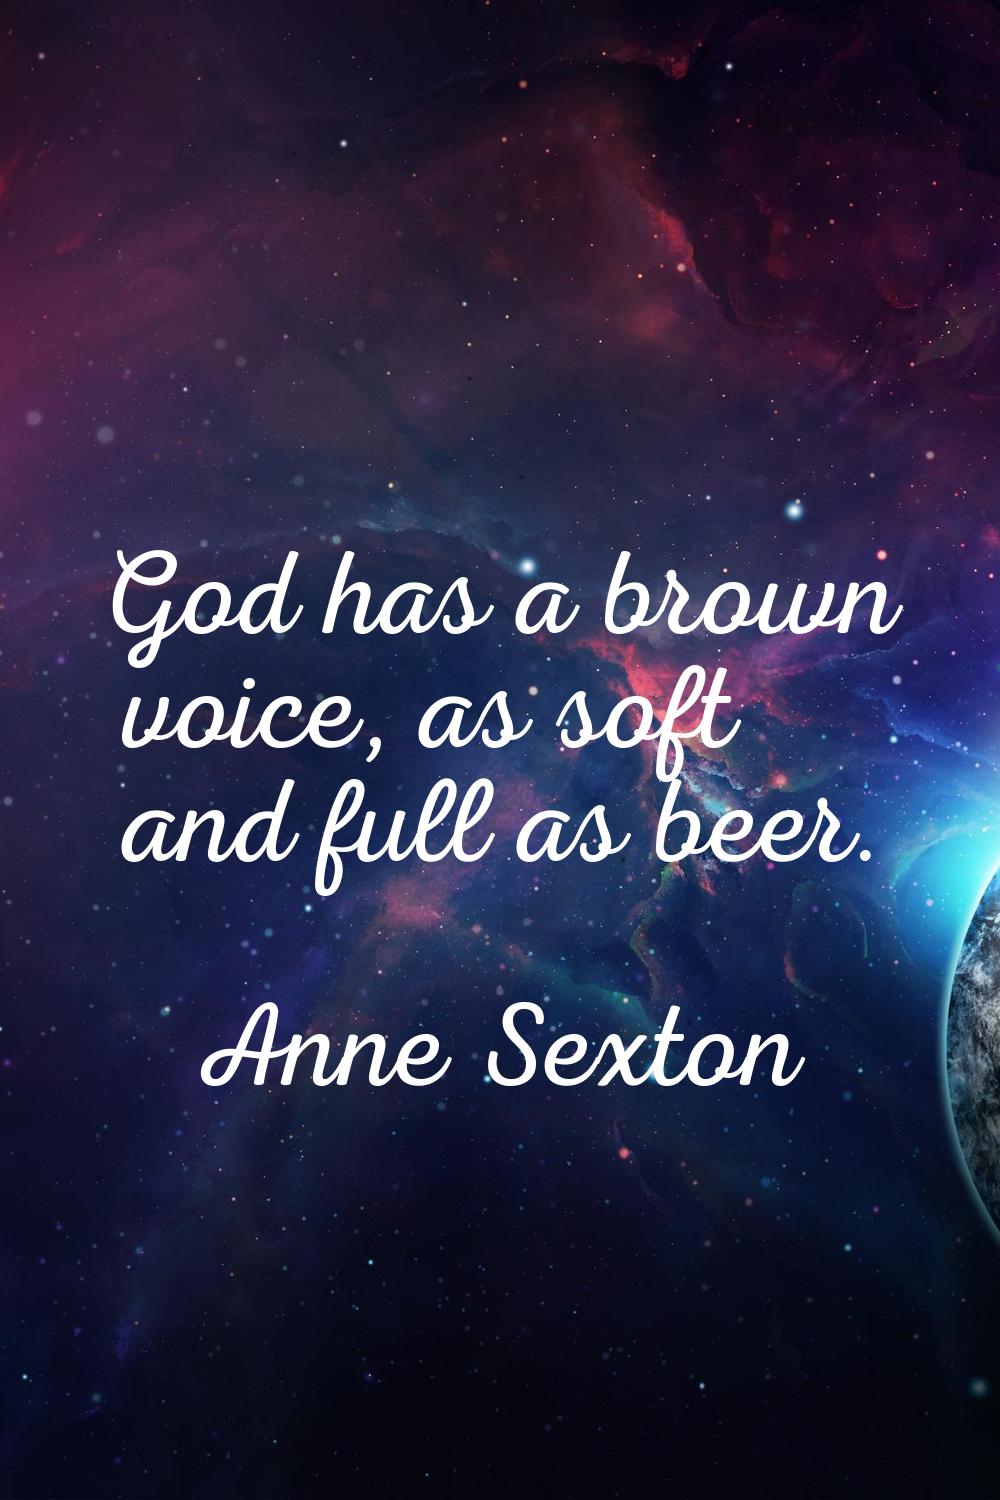 God has a brown voice, as soft and full as beer.